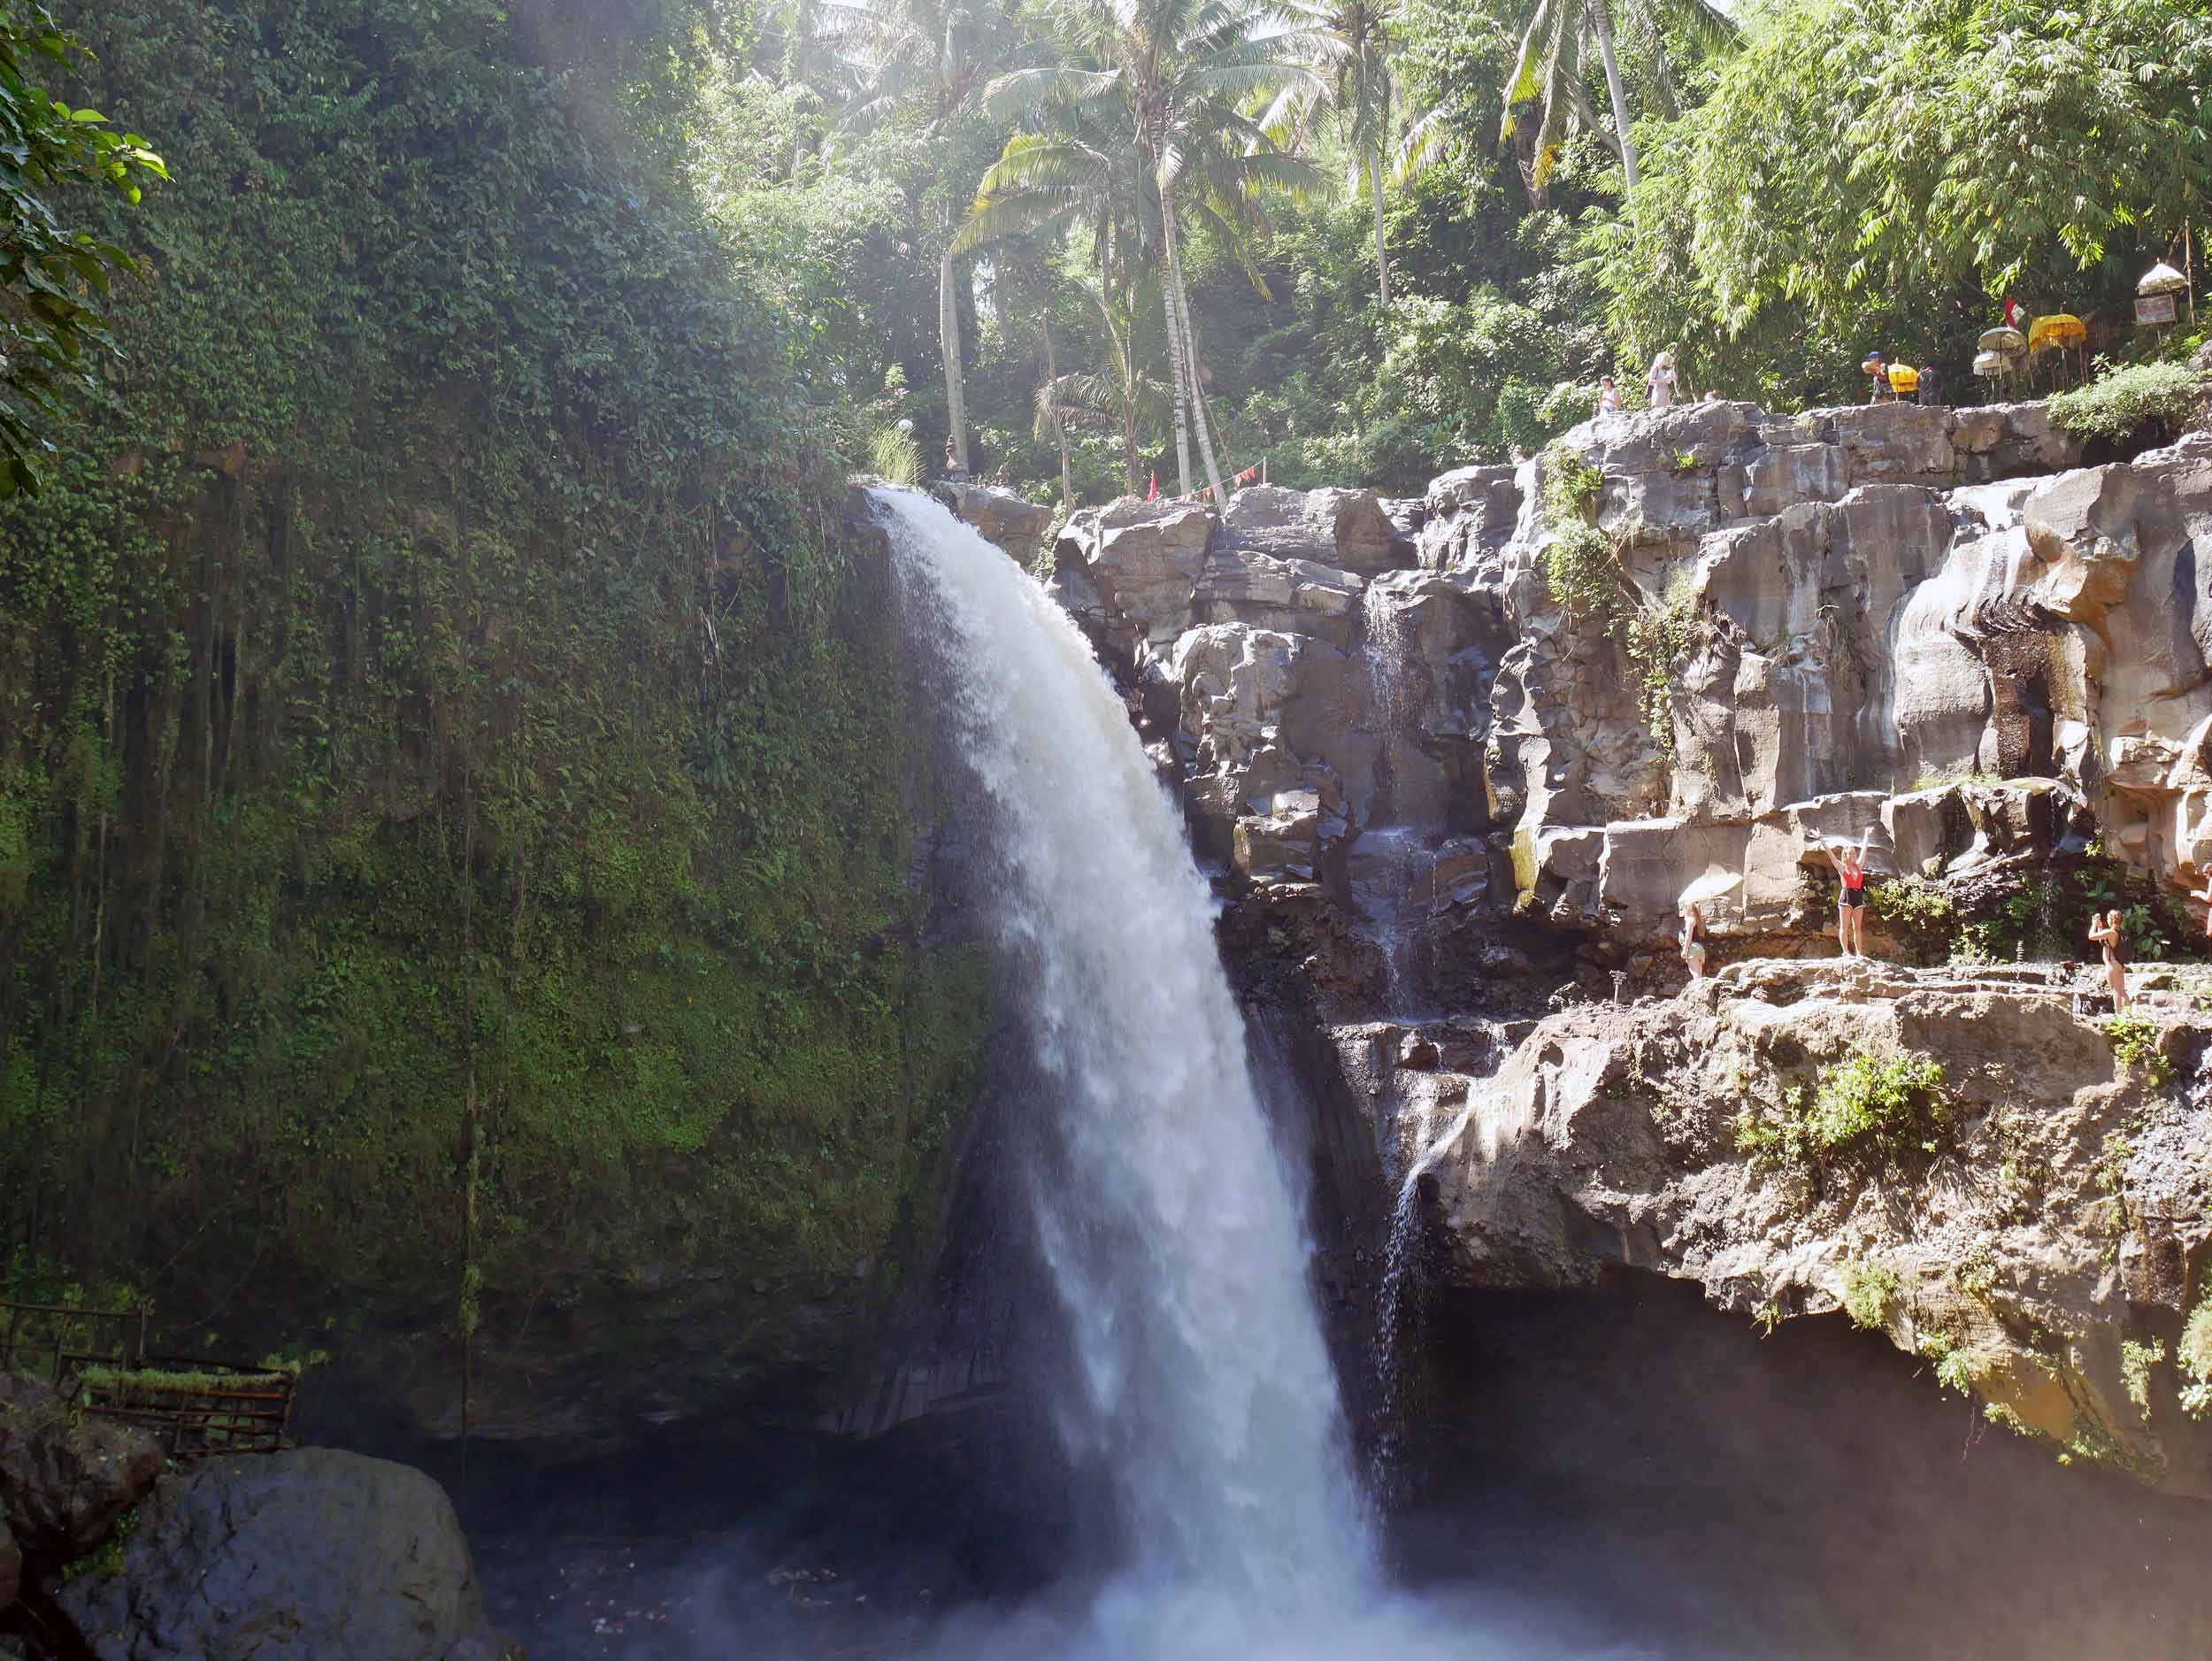  We spent one of our days in Ubud as tourists with our first stop to visit the surging Tegenungan Waterfall (May 30). 